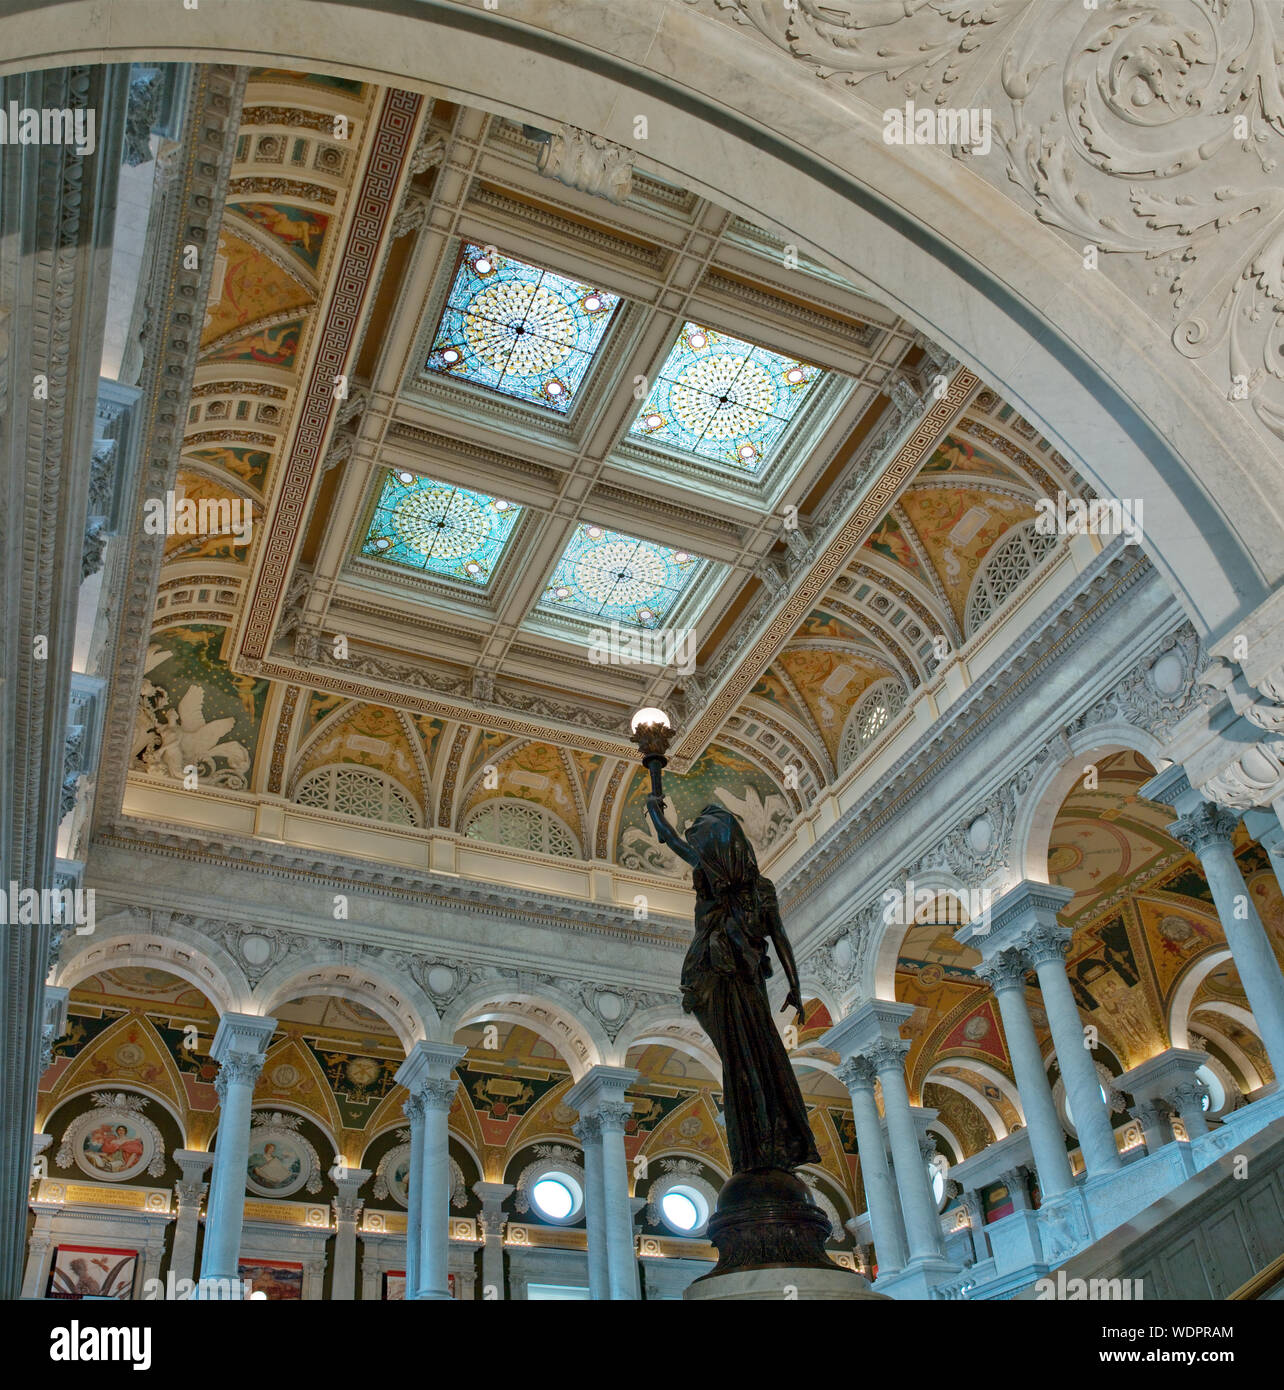 Great Hall. View of ceiling with bronze statue of female figure on newel post holding a torch of electric light. Library of Congress Thomas Jefferson Building, Washington, D.C. Stock Photo